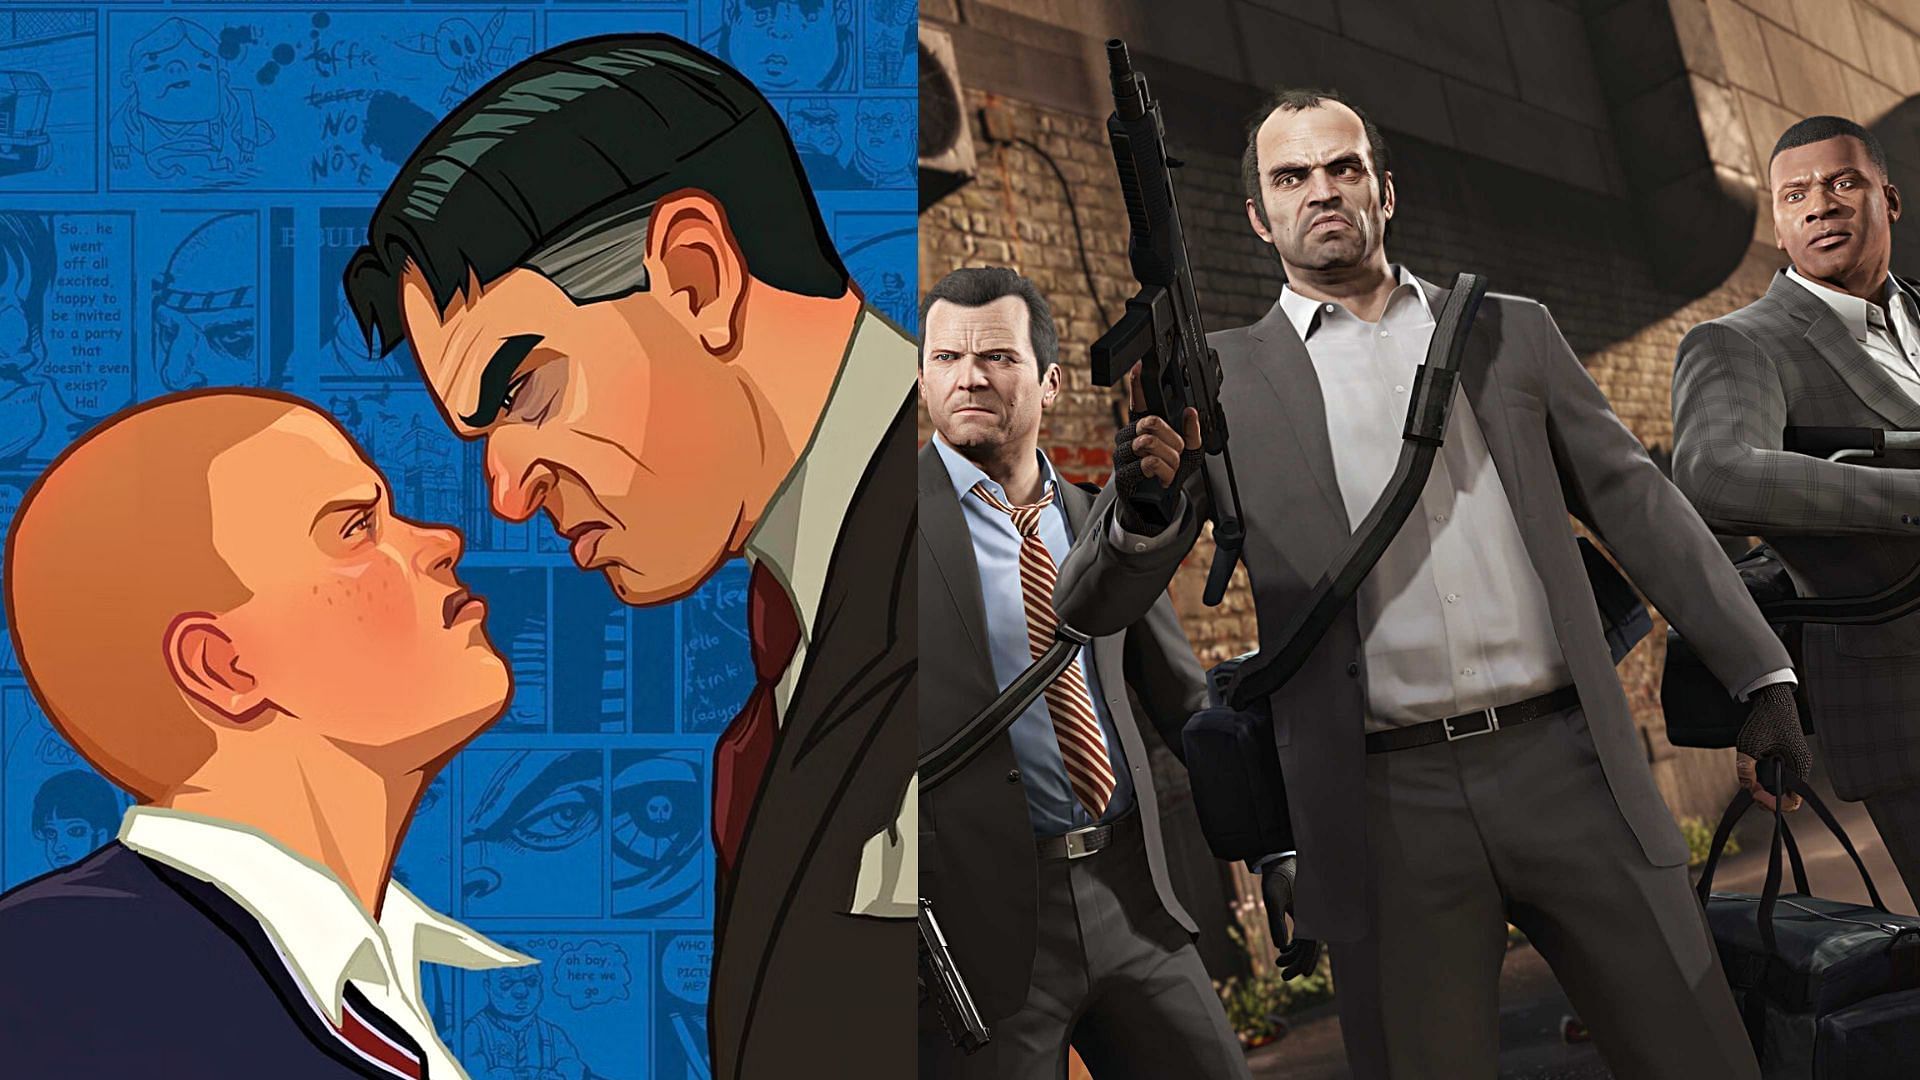 GTA 5 file leaks reportedly mention Bully 2 and GTA 5 story mode DLC (Images via Rockstar Games)